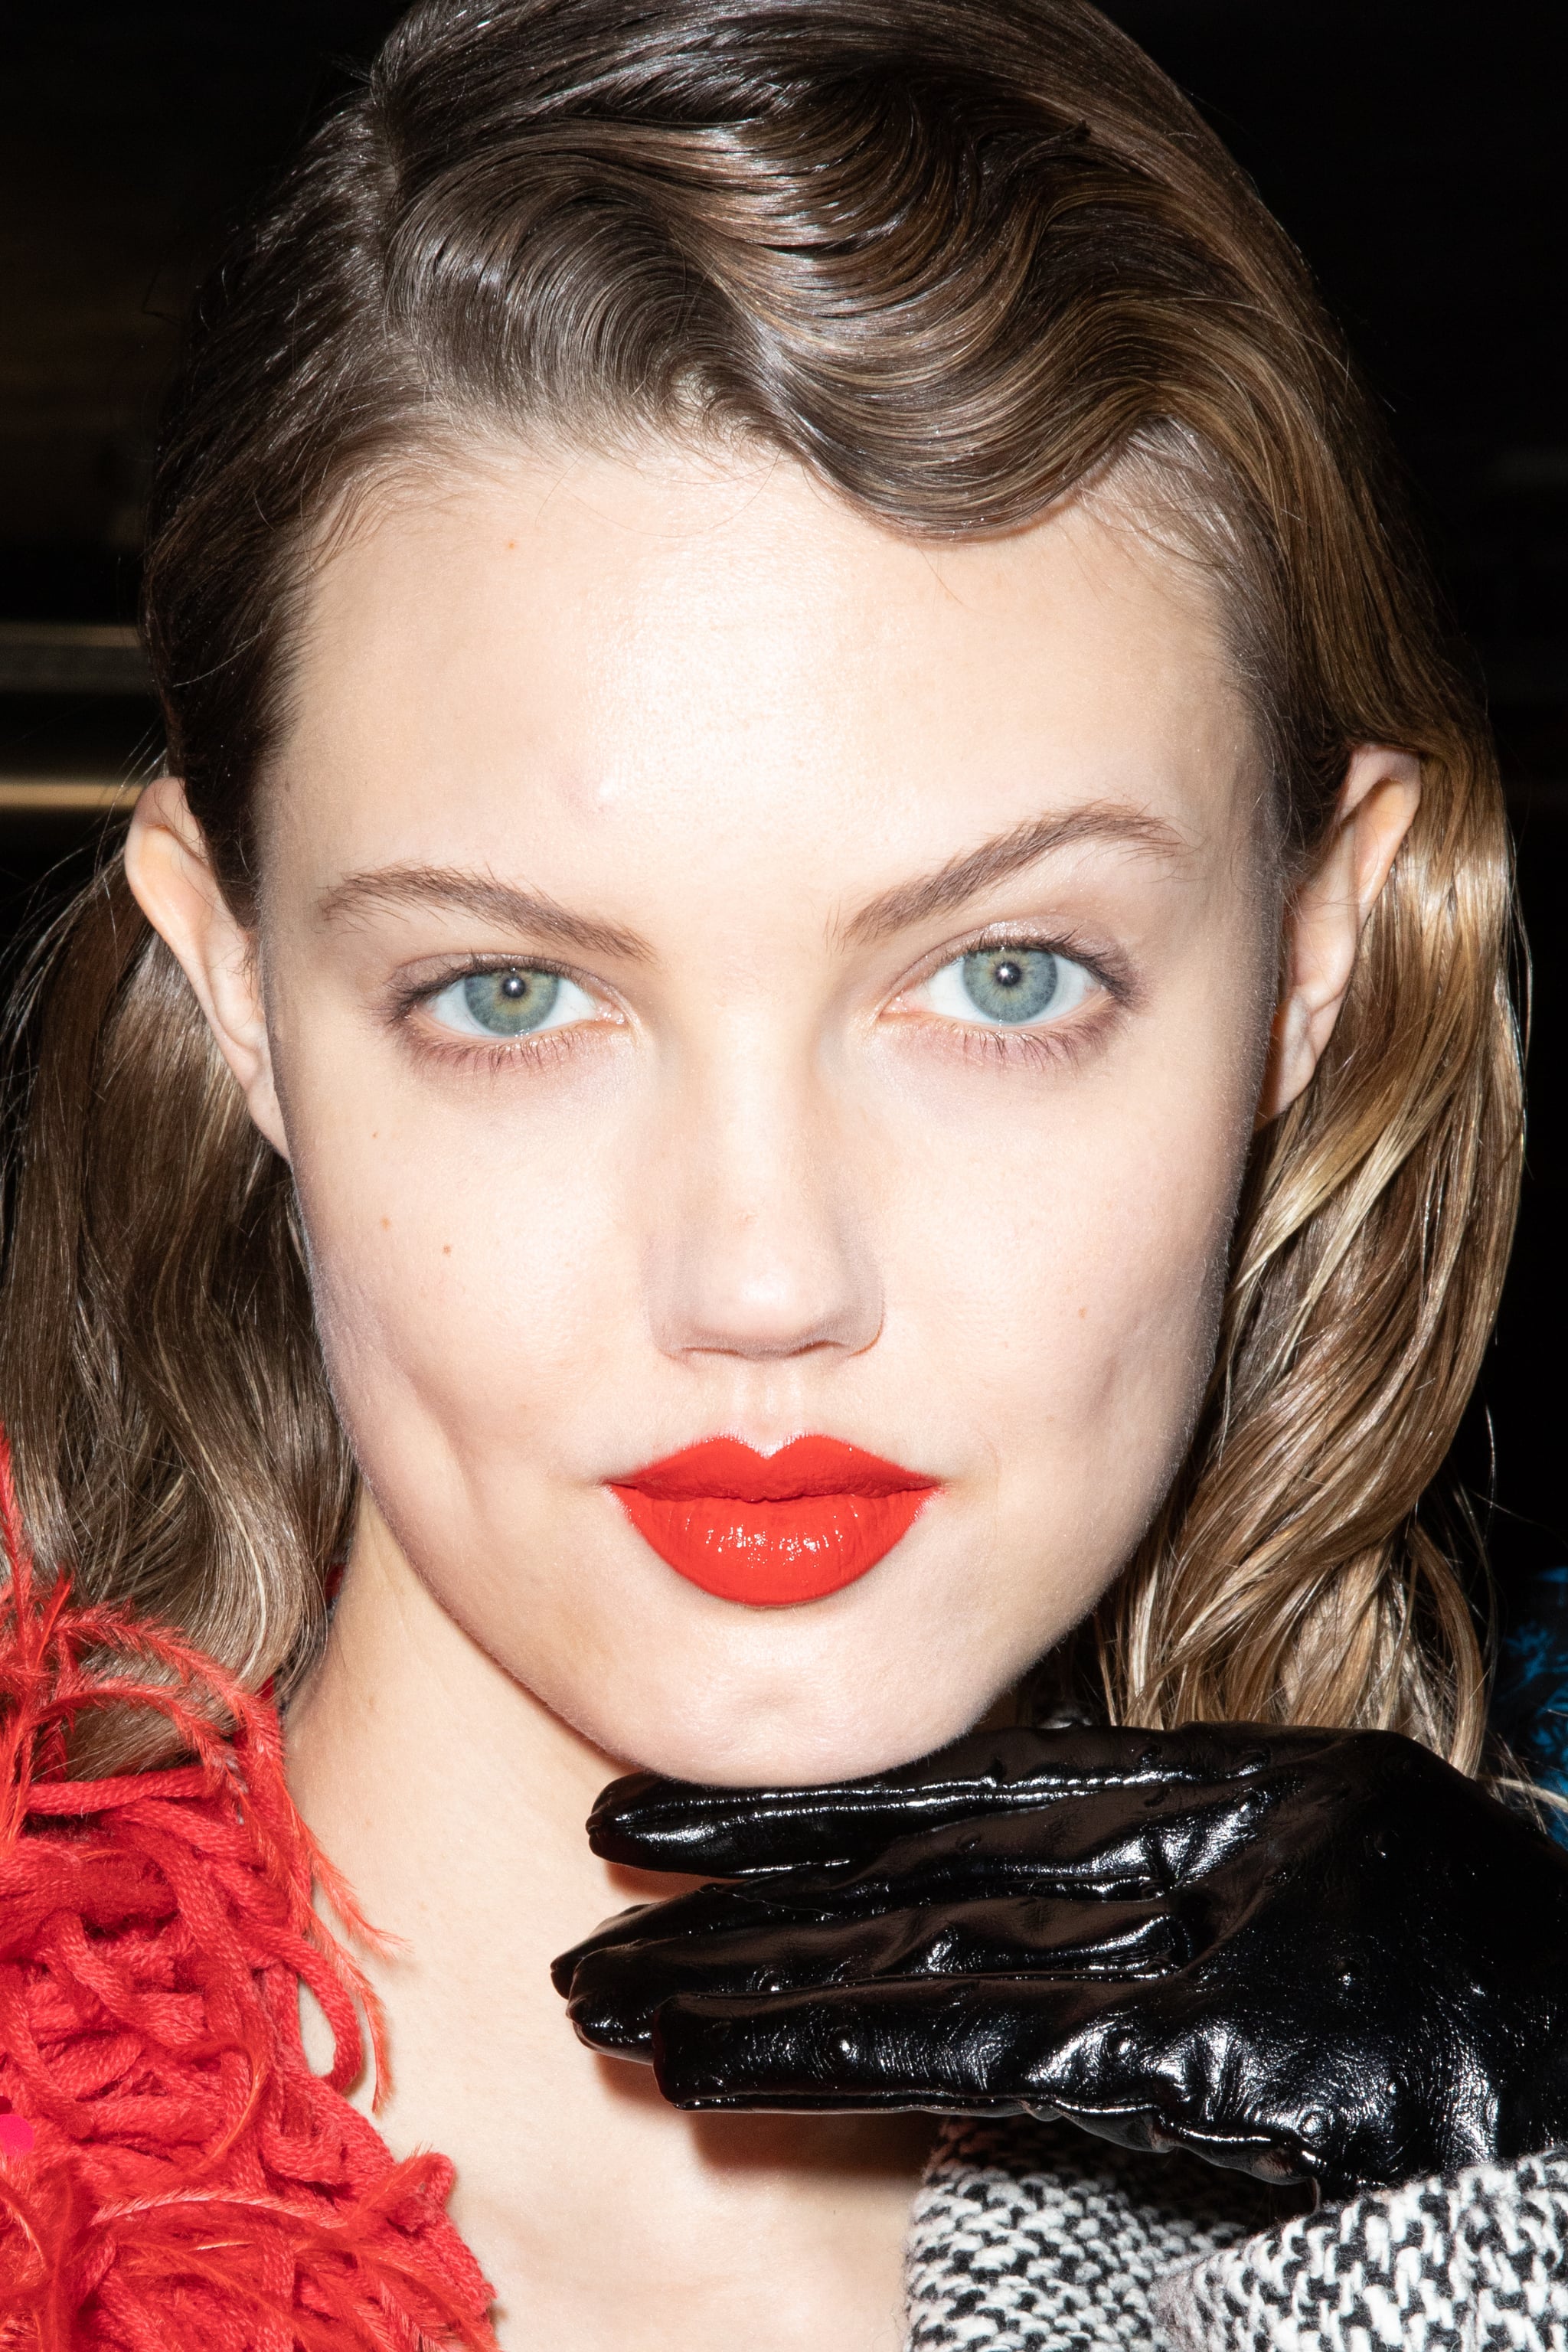 MILAN, ITALY - FEBRUARY 22: Model Lindsey Wixson is seen backstage at the MSGM fashion show on February 22, 2020 in Milan, Italy. (Photo by Rosdiana Ciaravolo/Getty Images)